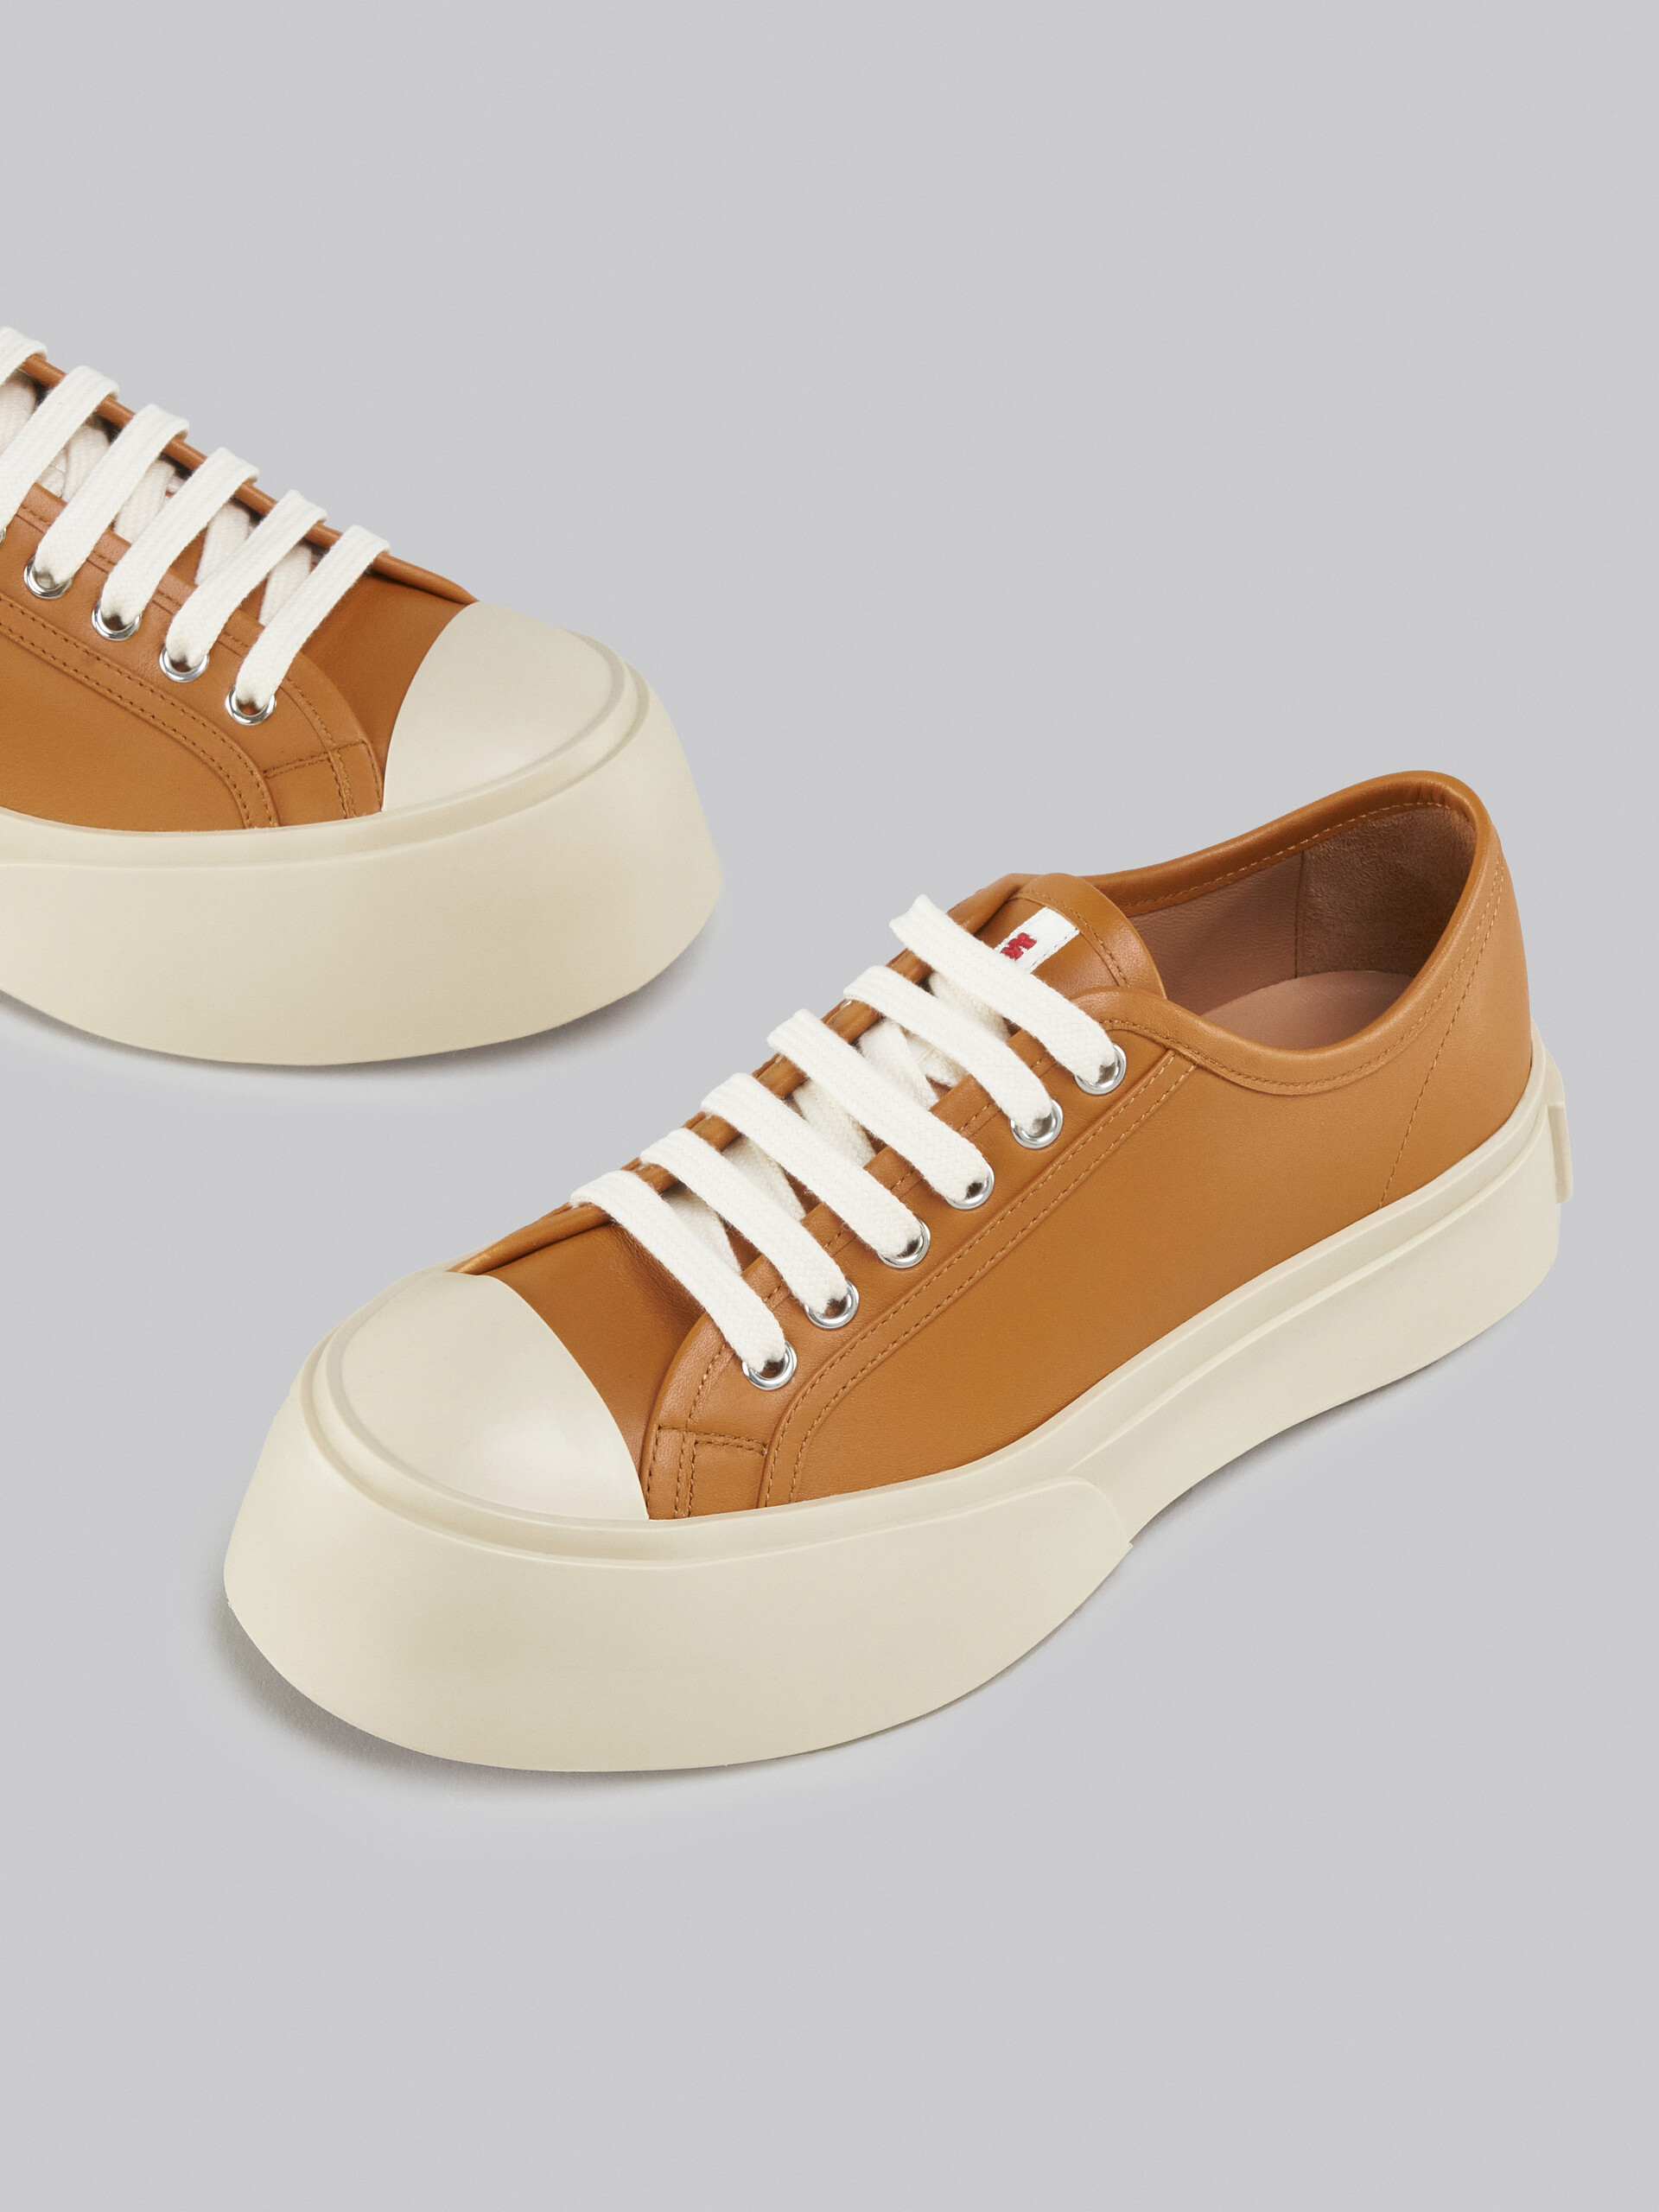 Brown nappa leather Pablo lace-up sneaker - Sneakers - Image 5